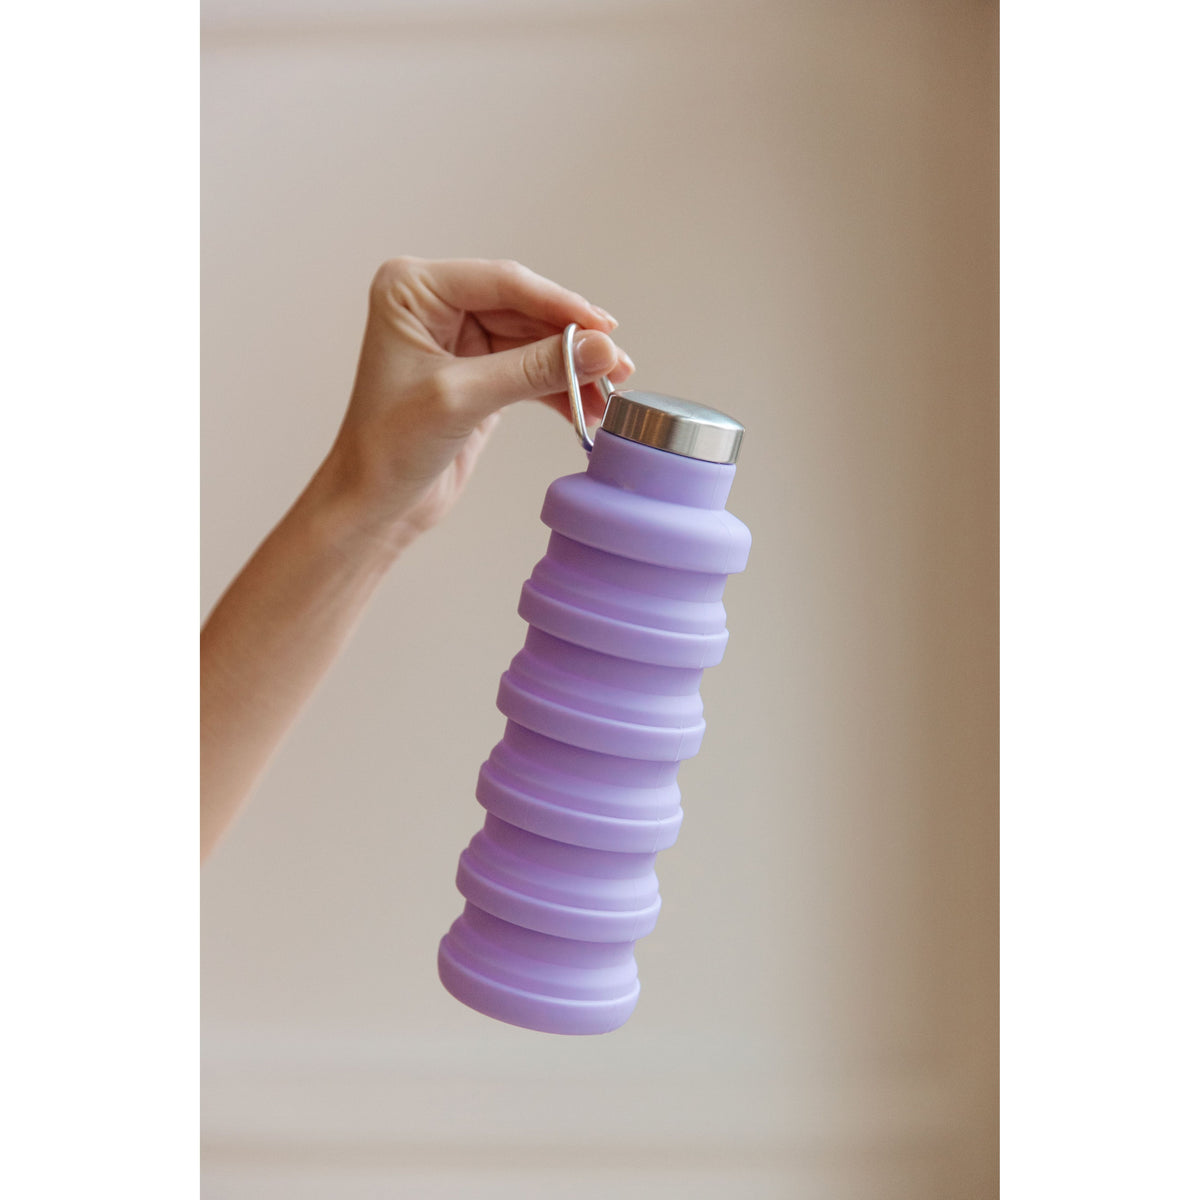 Collapsing Silicon Water Bottle in Purple